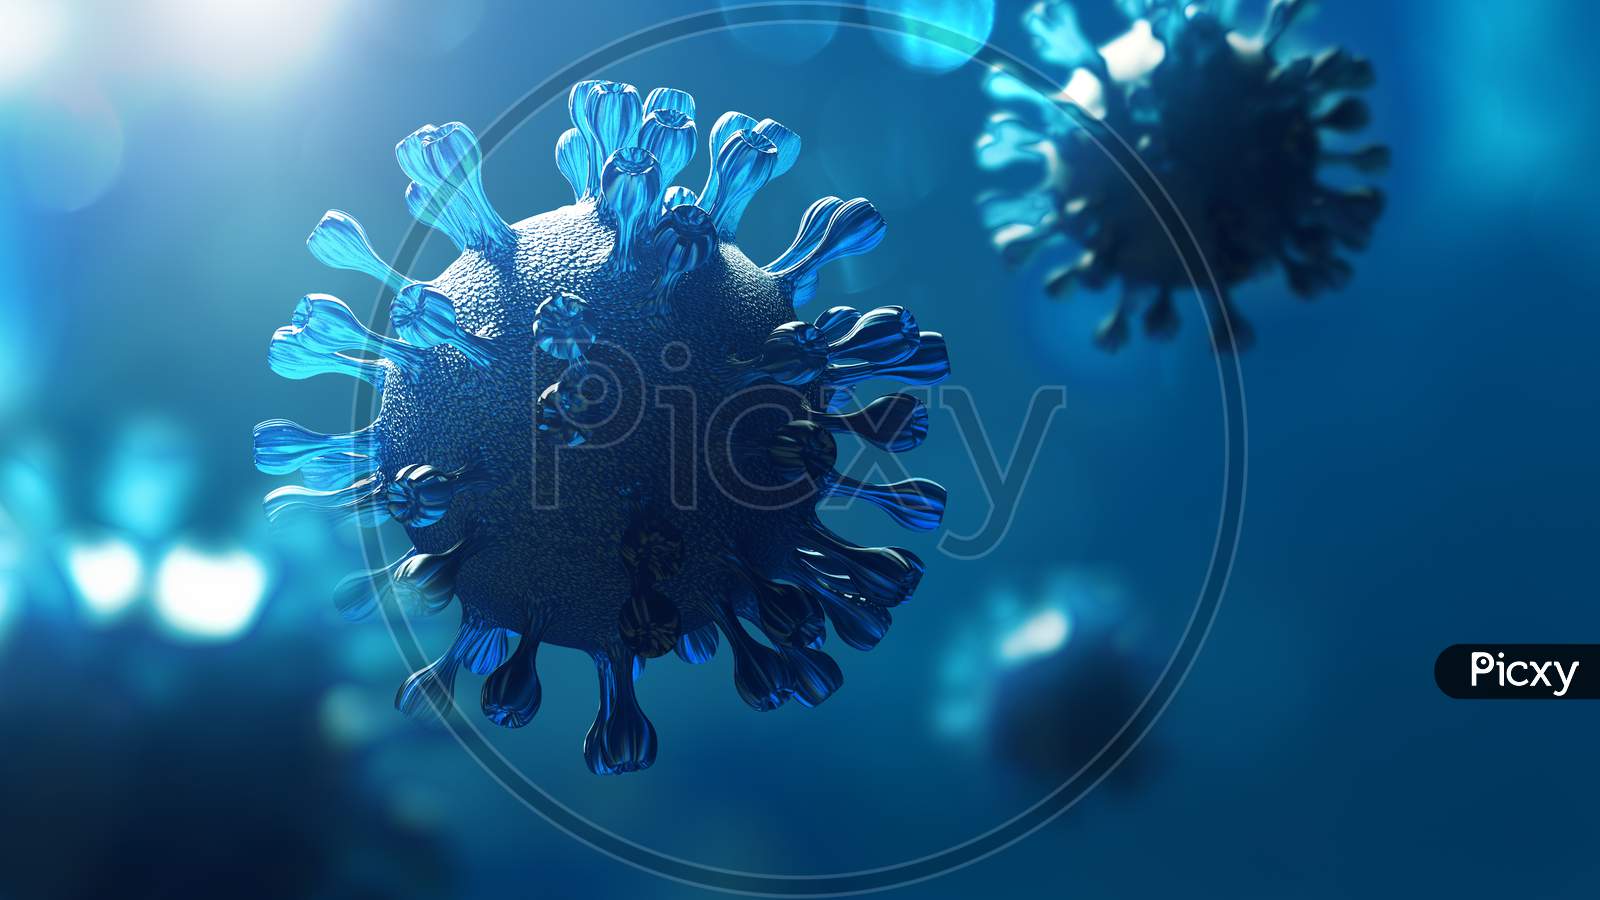 Super Closeup Coronavirus Covid-19 In Human Lung Background. Science Micro Biology Concept. Blue Corona Virus Outbreak Epidemic. Medical Health Virology Infection Researching. 3D Illustration